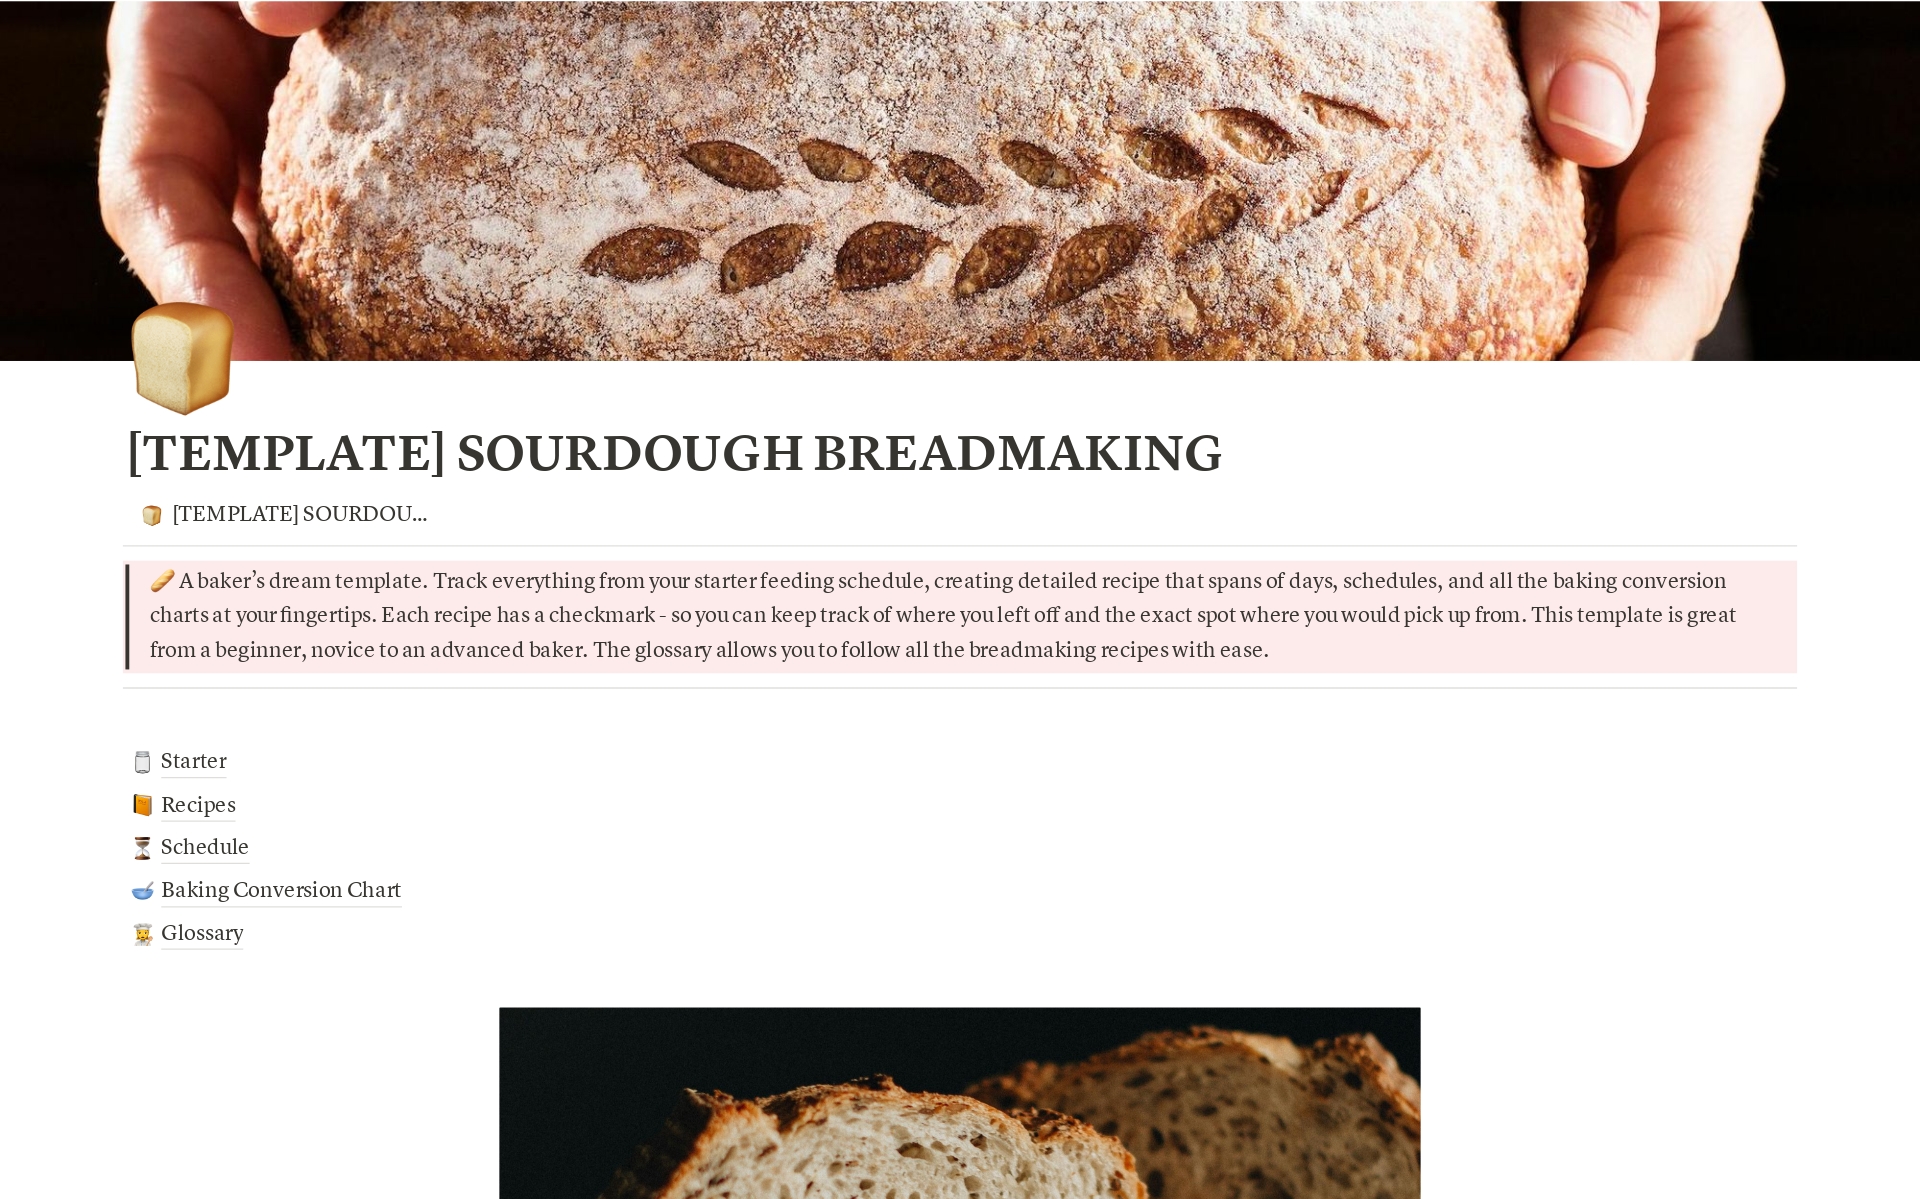 A baker's dream template. Everything you need for your sourdough breadmaking journey. Sourdough breadmaking is a slow process with detailed recipe instructions to follow. Track your starter, detailed recipe templates, handy conversion charts, and a glossary at your fingertips. 